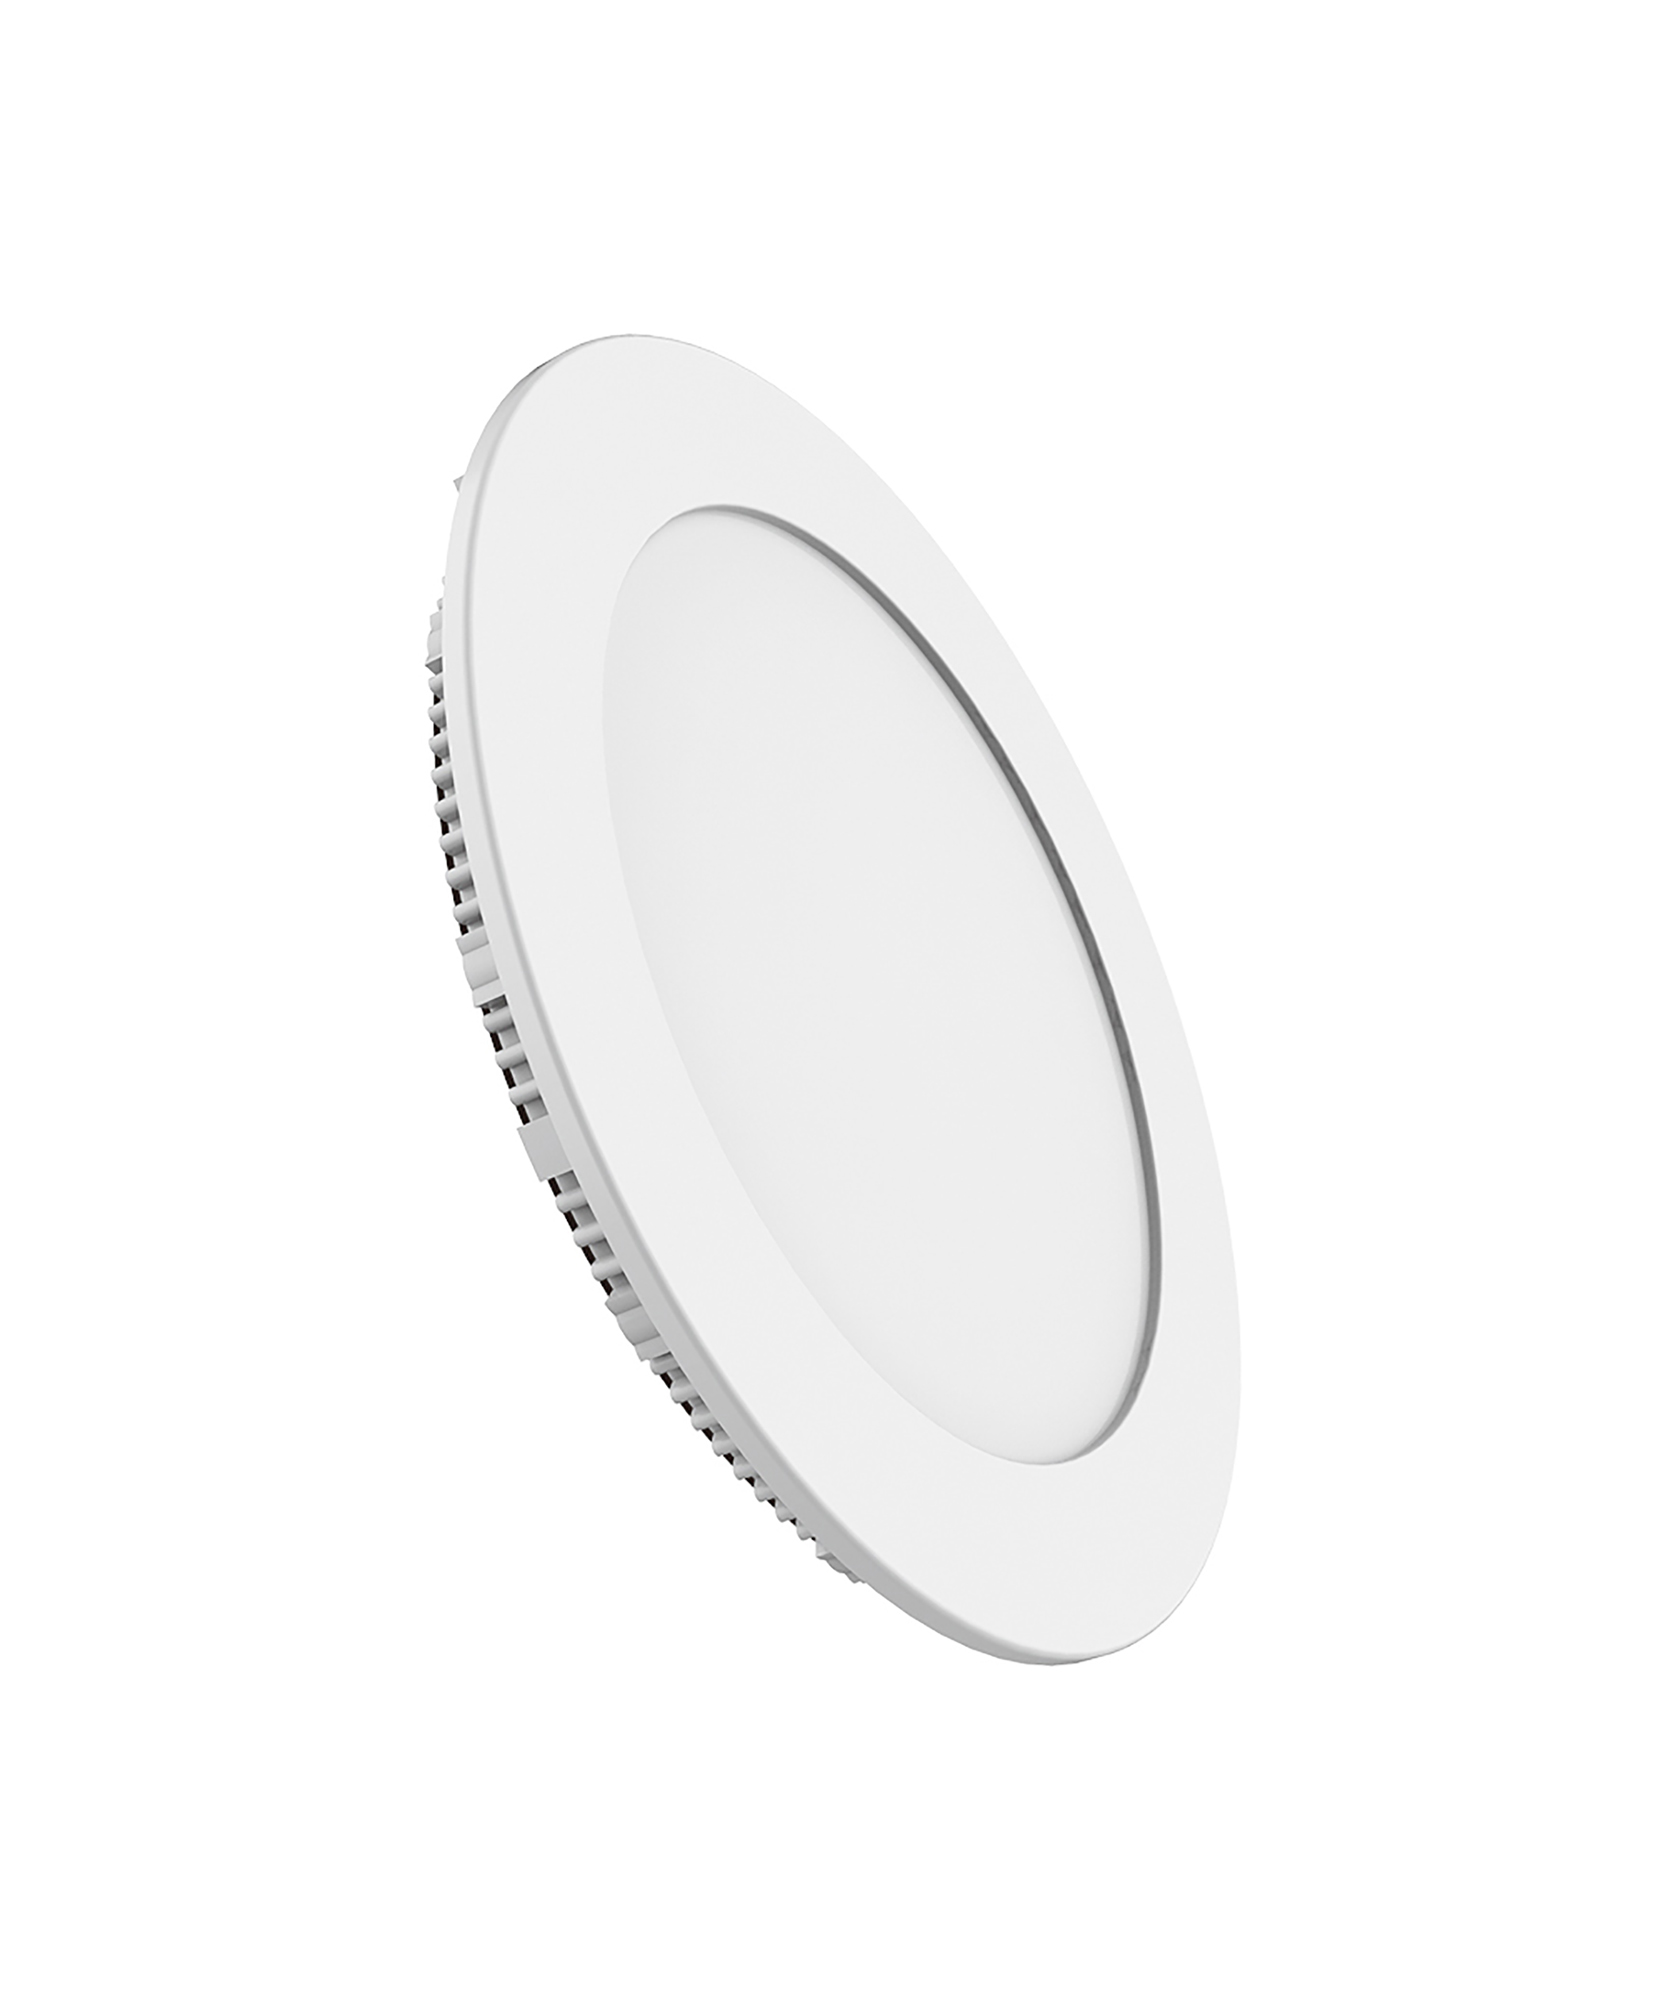 2061830010  Intego R Supervision Slim Recessed Round 300mm (12") 24W; 6400K; 120°; Cut-Out 280mm